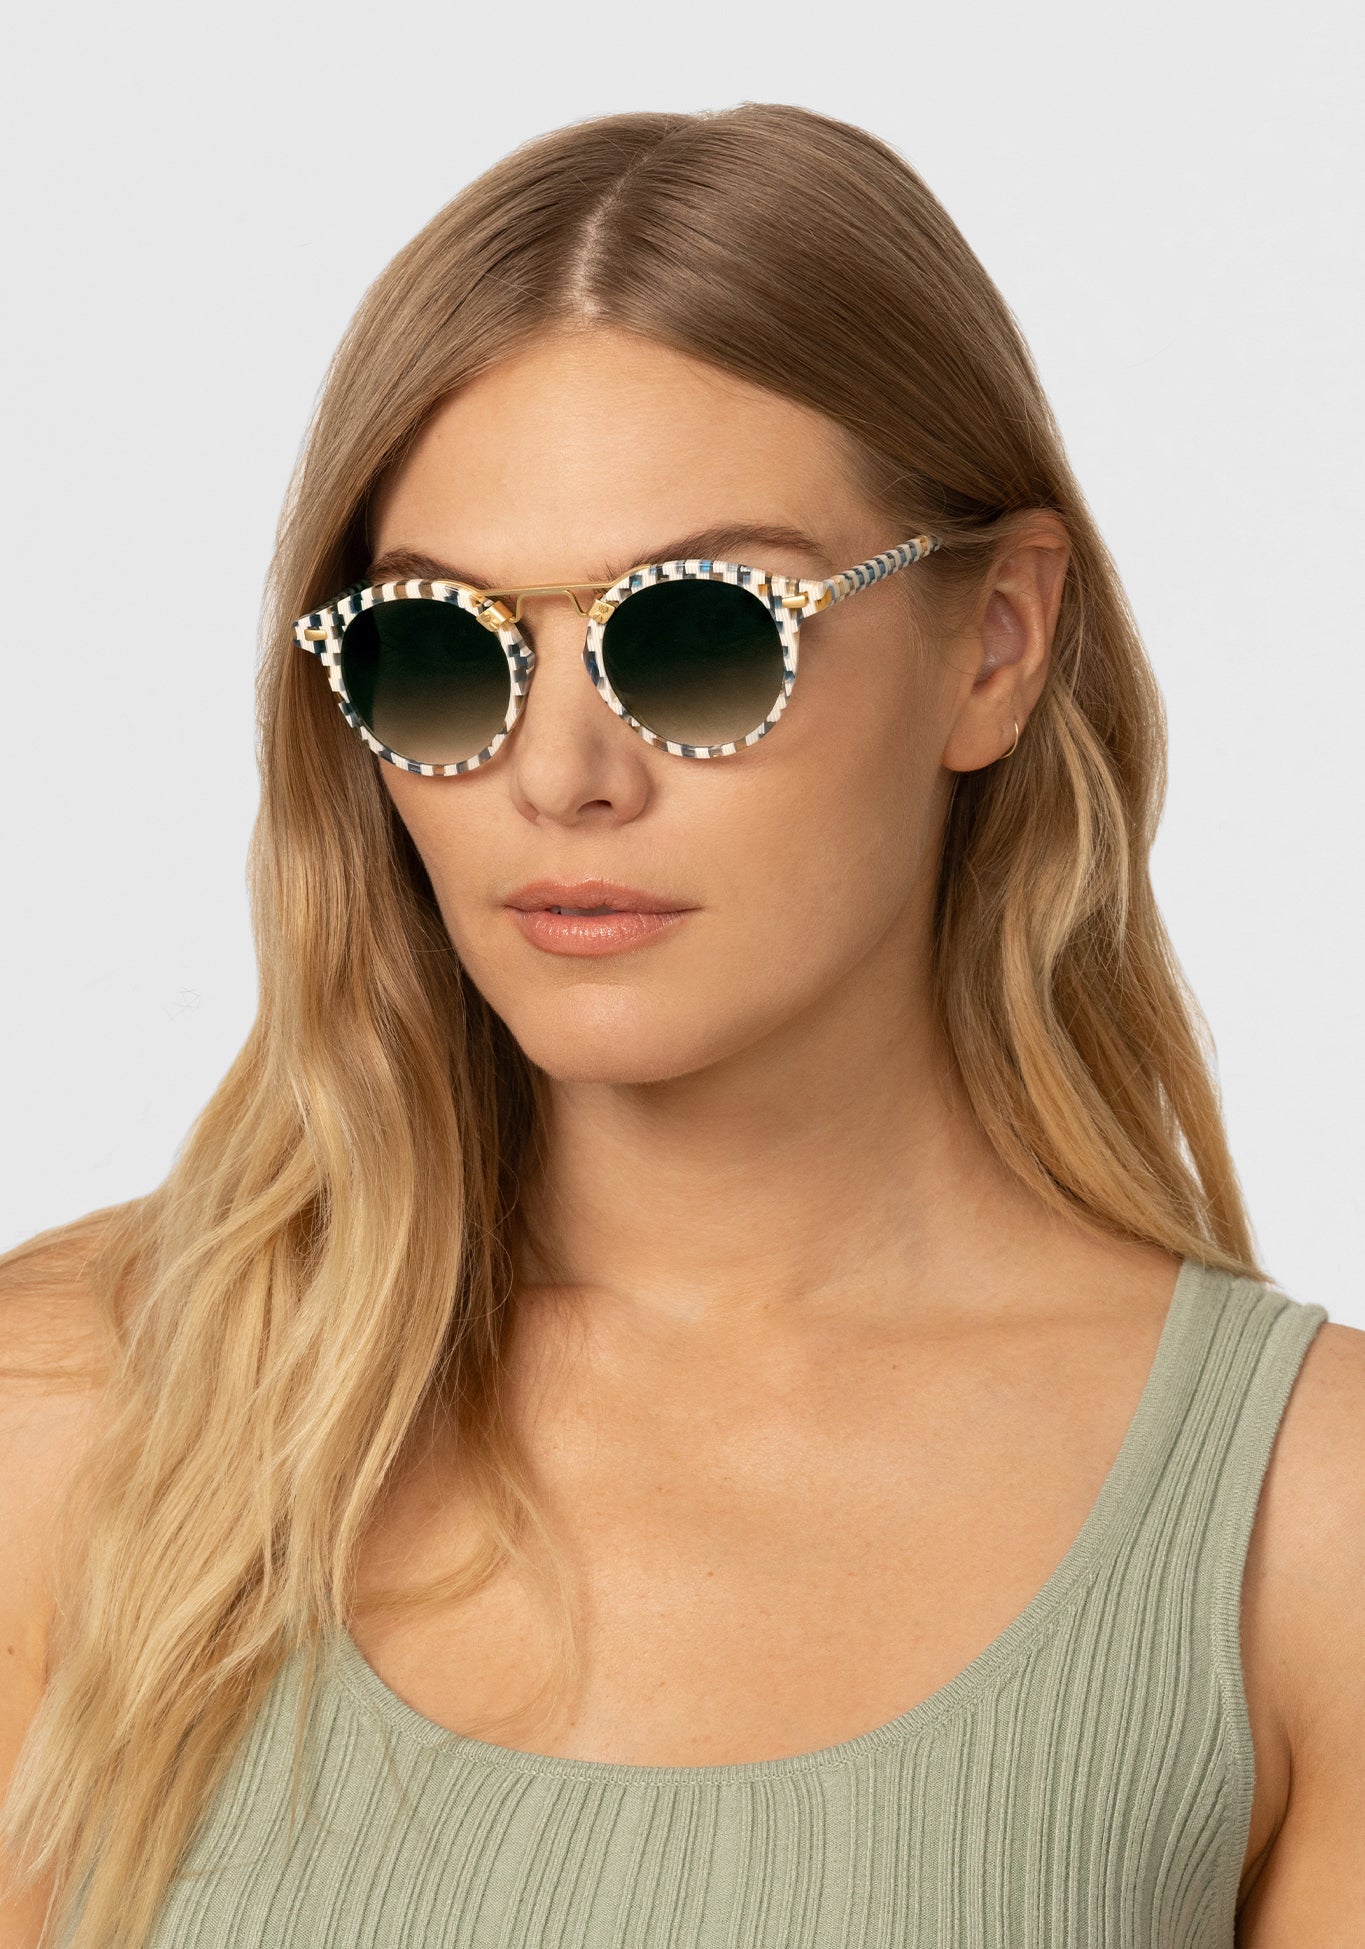 KREWE - Designer Round Sunglasses - ST. LOUIS CLASSICS | Pincheck 18K Handcrafted, luxury blue and white checkered acetate round sunglasses with a double metal bridge. A bestseller. Oliver Peoples Sunglasses, Moscot sunglasses womens model | Model: Maritza